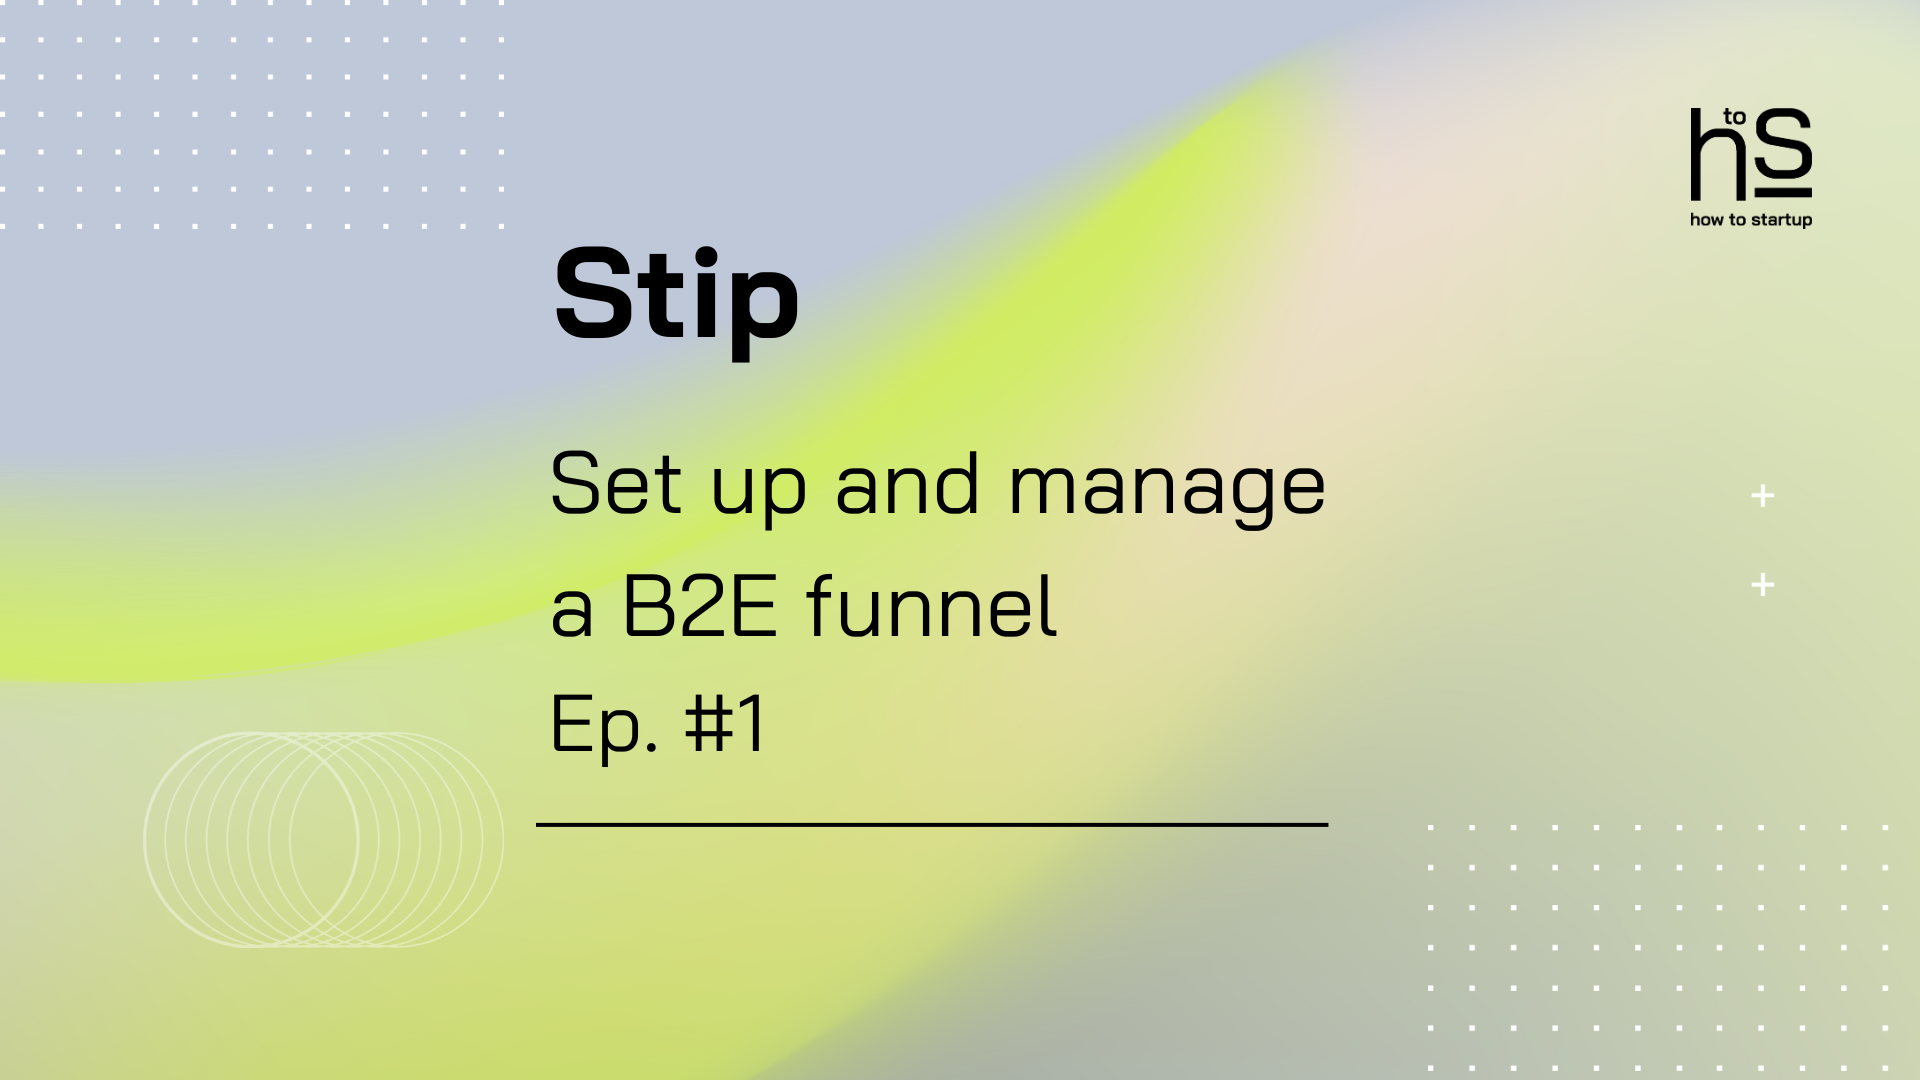 How to StartUP | Set up and manage a B2E funnel (Ep. #1)